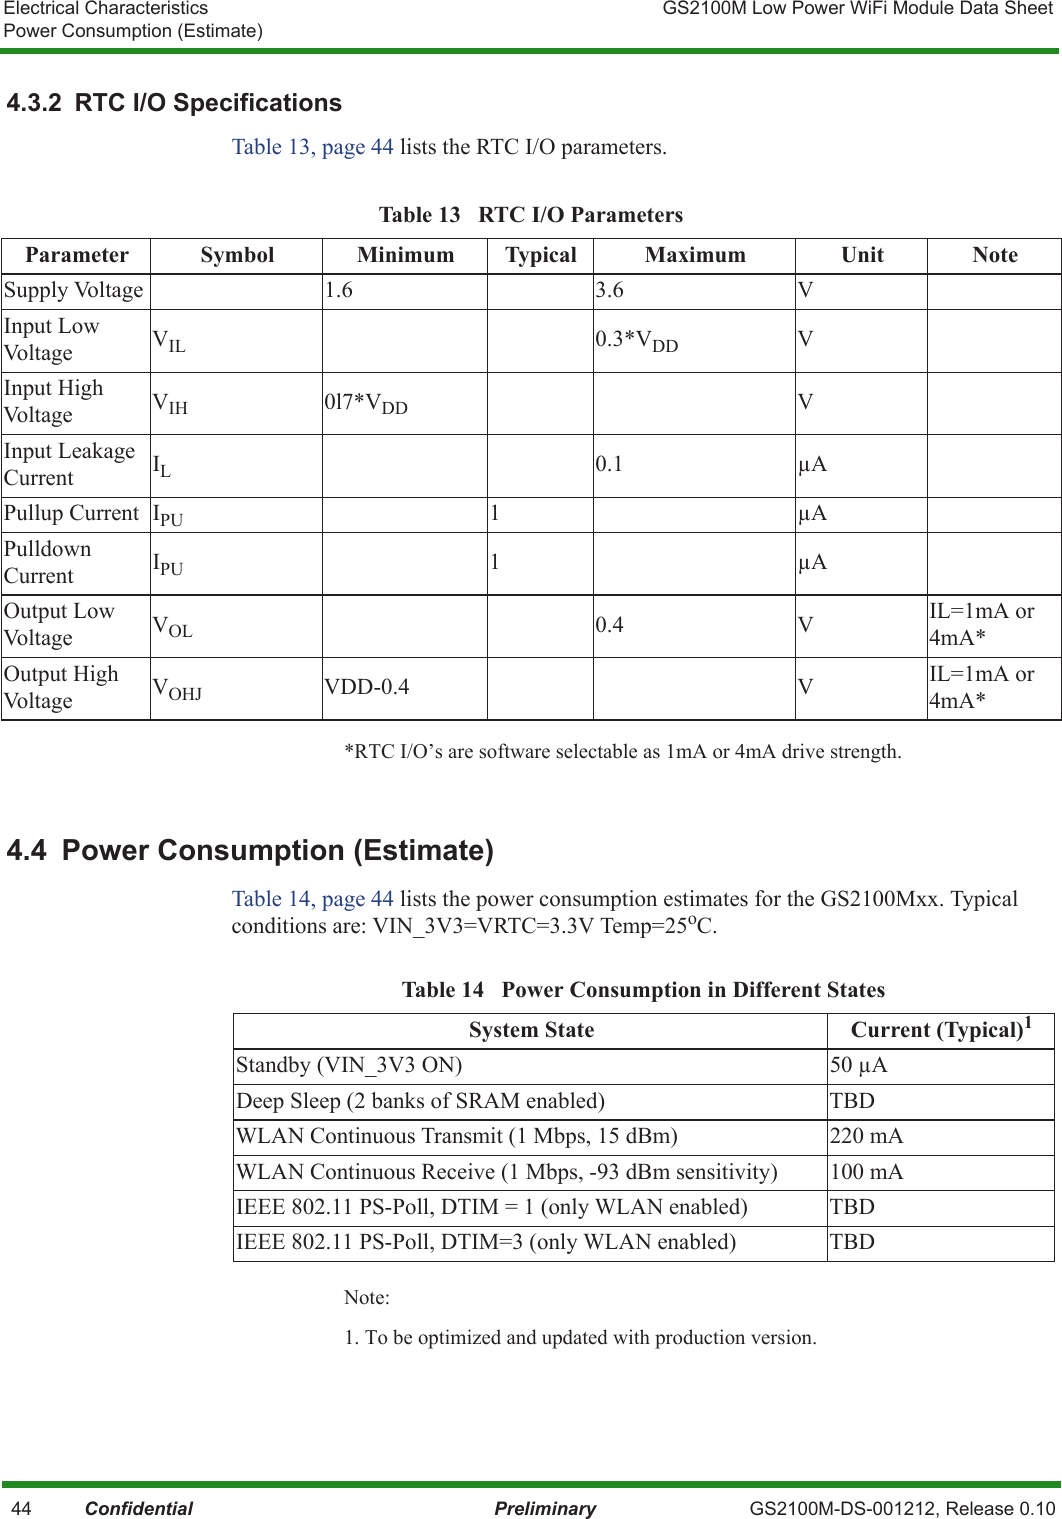 Electrical Characteristics GS2100M Low Power WiFi Module Data SheetPower Consumption (Estimate)   44          Confidential Preliminary GS2100M-DS-001212, Release 0.104.3.2  RTC I/O SpecificationsTable 13, page 44 lists the RTC I/O parameters.*RTC I/O’s are software selectable as 1mA or 4mA drive strength.4.4  Power Consumption (Estimate)Table 14, page 44 lists the power consumption estimates for the GS2100Mxx. Typical conditions are: VIN_3V3=VRTC=3.3V Temp=25oC.Note:1. To be optimized and updated with production version.Table 13   RTC I/O ParametersParameter Symbol Minimum Typical Maximum Unit NoteSupply Voltage 1.6 3.6 VInput Low Voltage VIL 0.3*VDD VInput High Voltage VIH 0l7*VDD VInput Leakage Current IL0.1 μAPullup Current IPU 1μAPulldown Current IPU 1μAOutput Low Voltage VOL 0.4 V IL=1mA or 4mA*Output High Voltage VOHJ VDD-0.4 V IL=1mA or 4mA*Table 14   Power Consumption in Different StatesSystem State Current (Typical)1Standby (VIN_3V3 ON) 50 μADeep Sleep (2 banks of SRAM enabled) TBDWLAN Continuous Transmit (1 Mbps, 15 dBm) 220 mAWLAN Continuous Receive (1 Mbps, -93 dBm sensitivity) 100 mAIEEE 802.11 PS-Poll, DTIM = 1 (only WLAN enabled) TBDIEEE 802.11 PS-Poll, DTIM=3 (only WLAN enabled) TBD